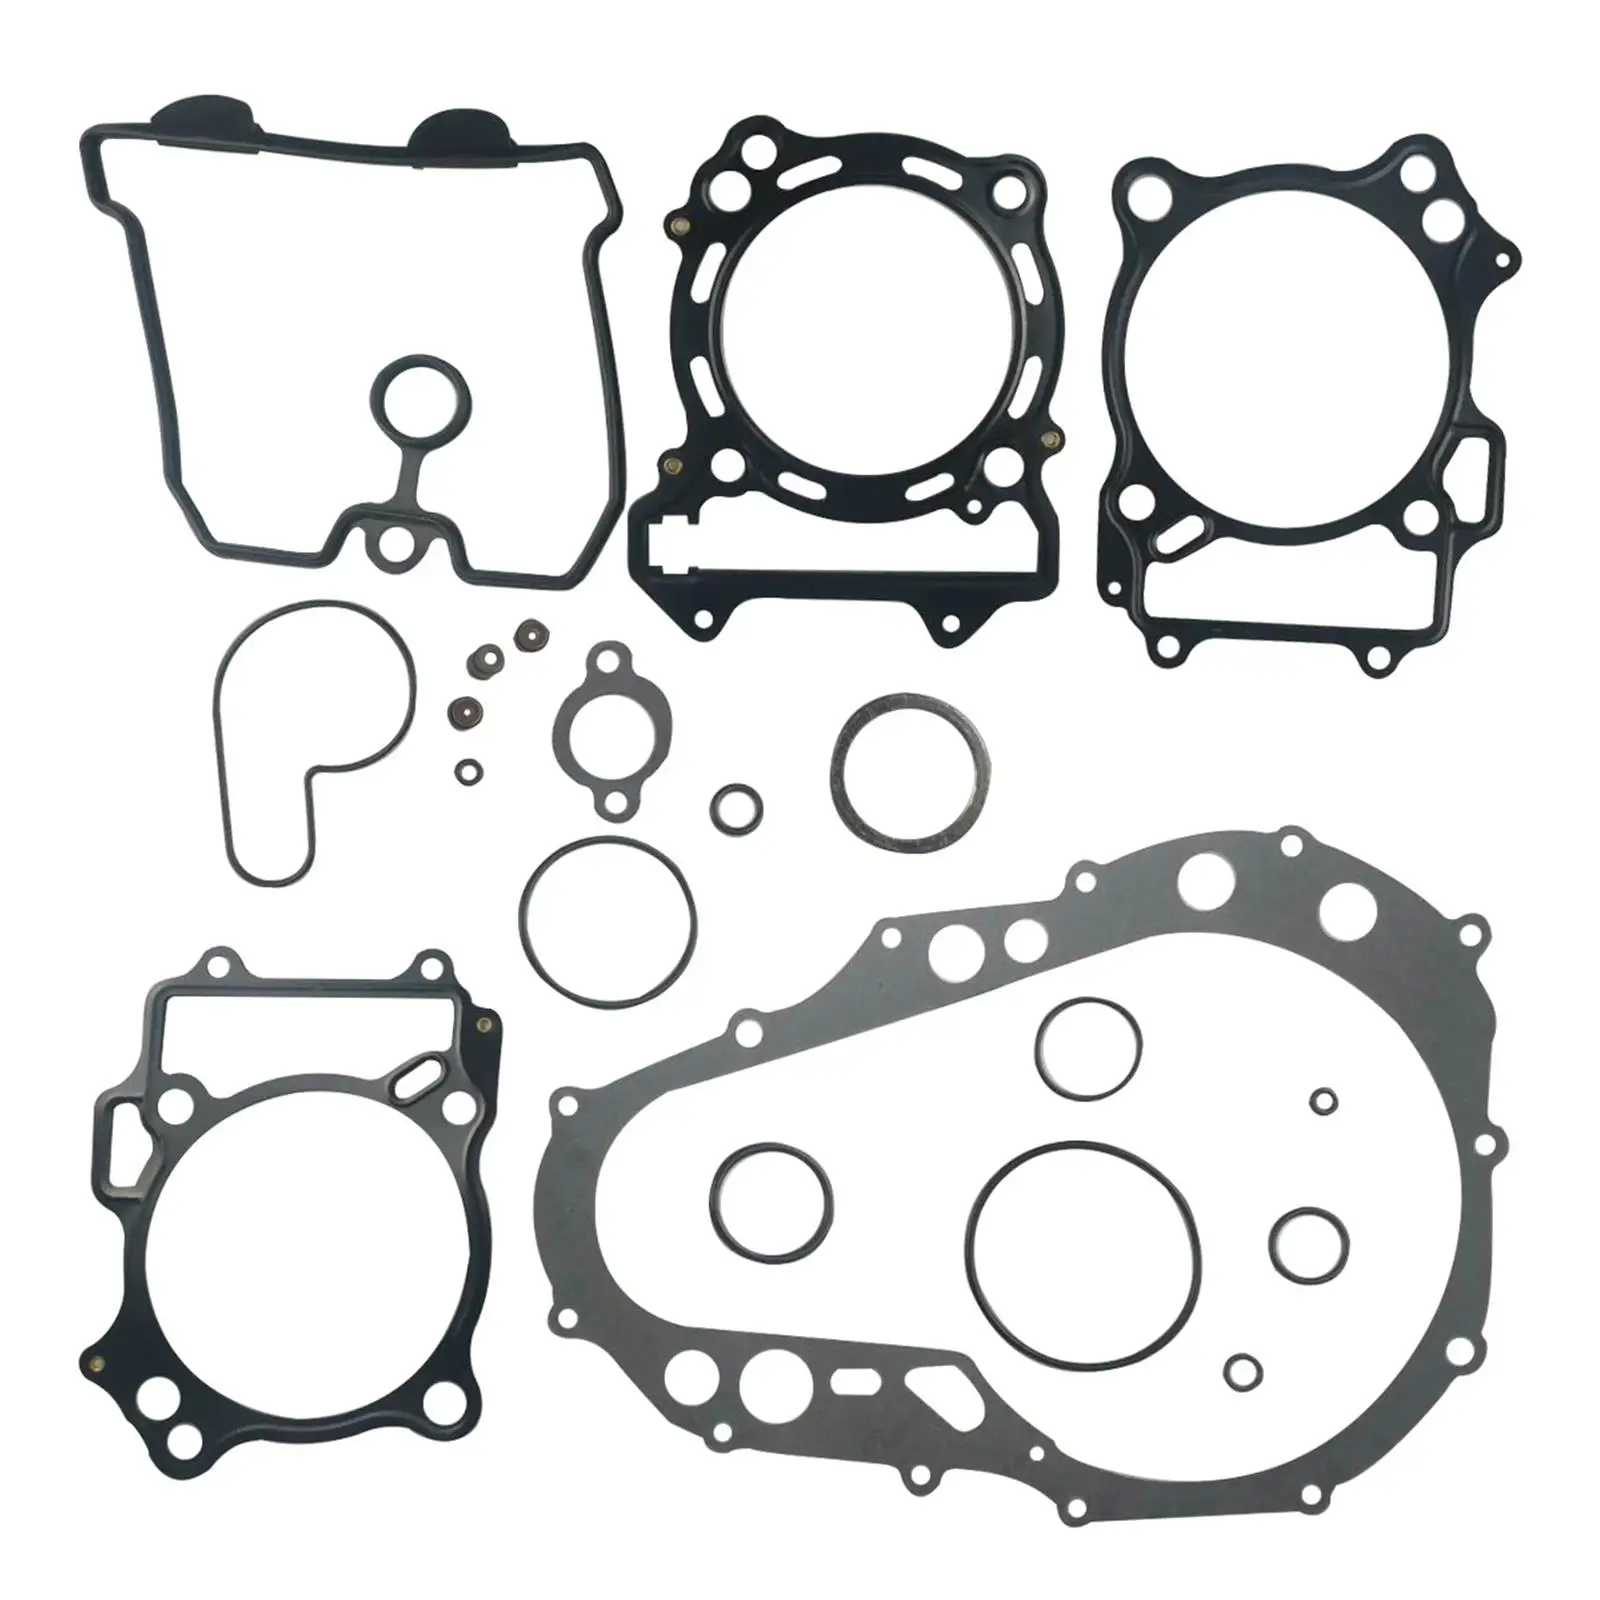 Full Set Gaskets 0934-1676 for Arctic Cat 400 DVX Replace Motorcycle